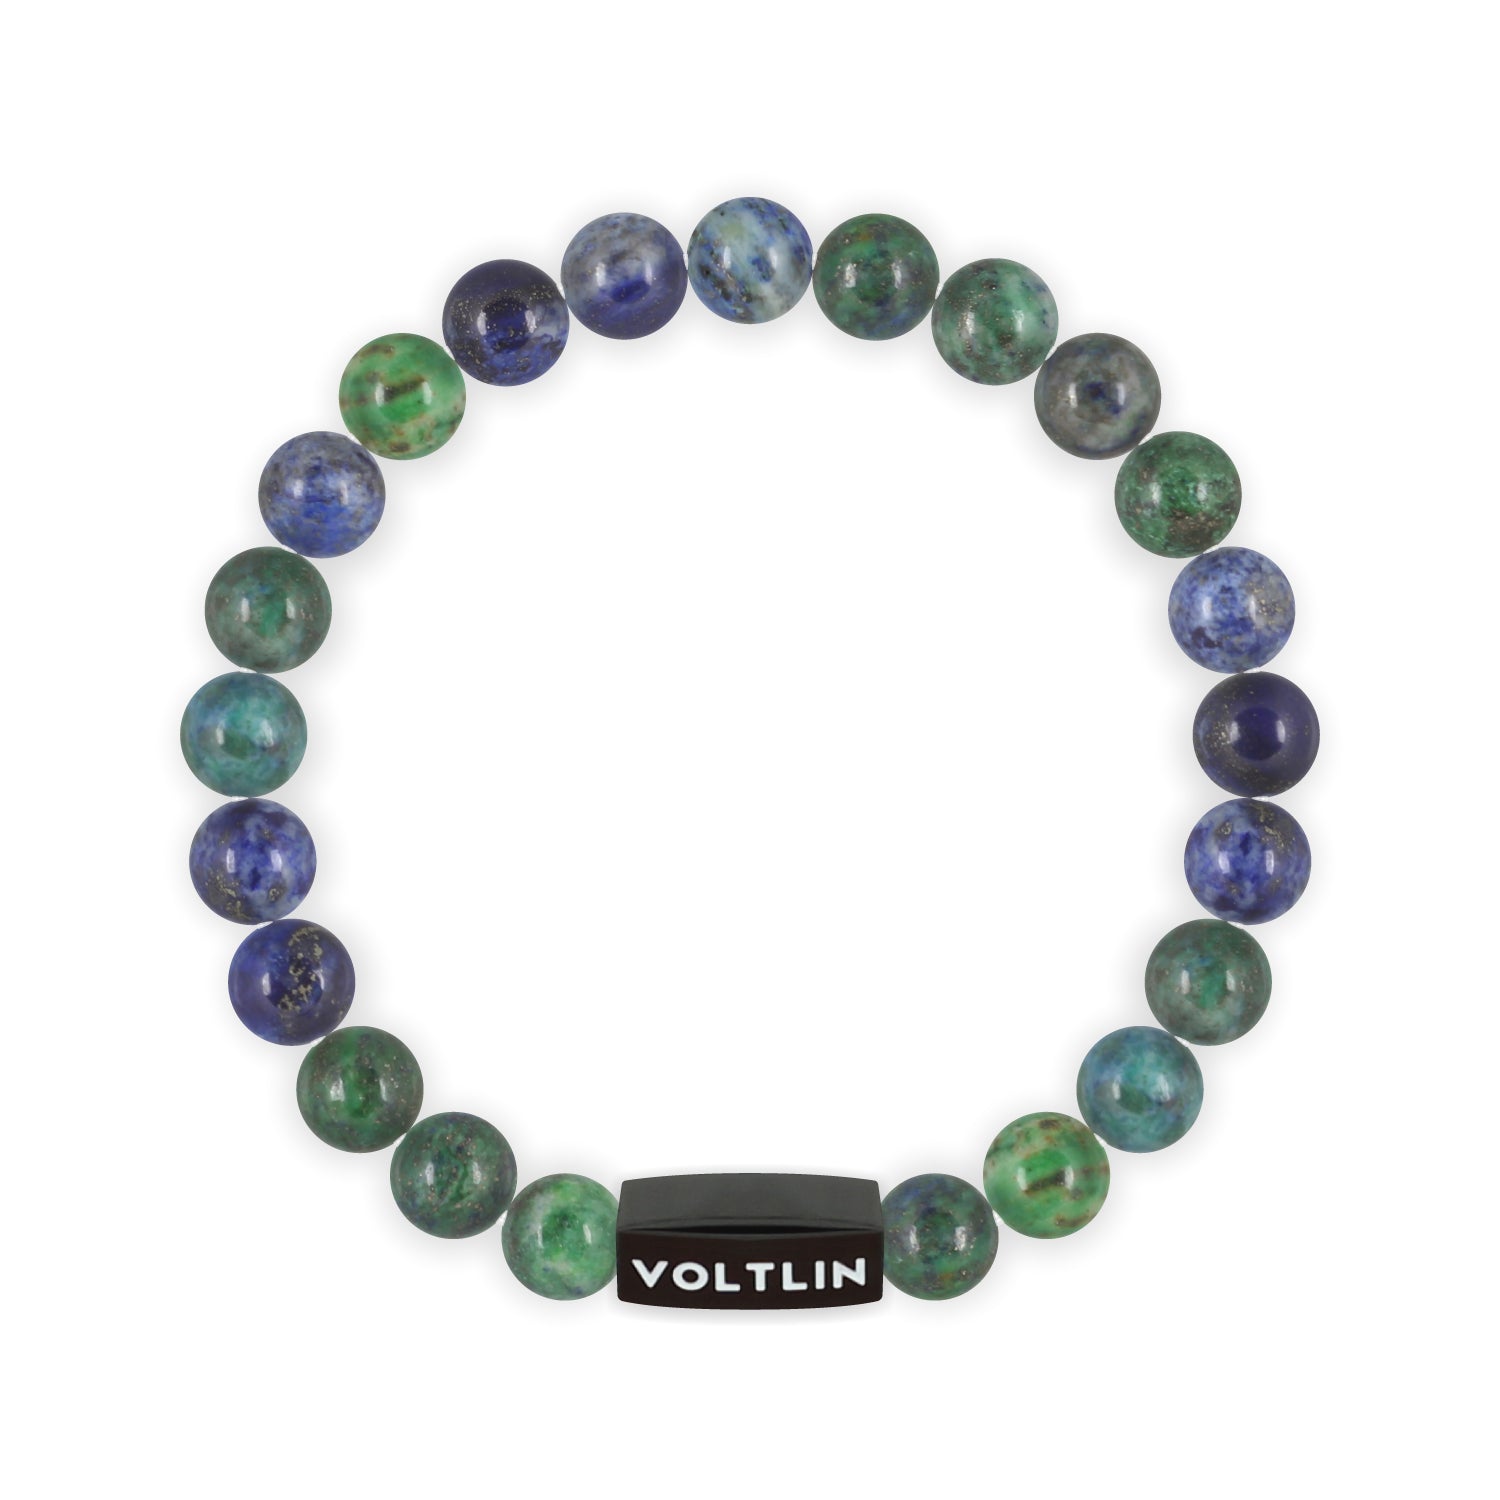 Front view of an 8mm Azurite crystal beaded stretch bracelet with black stainless steel logo bead made by Voltlin